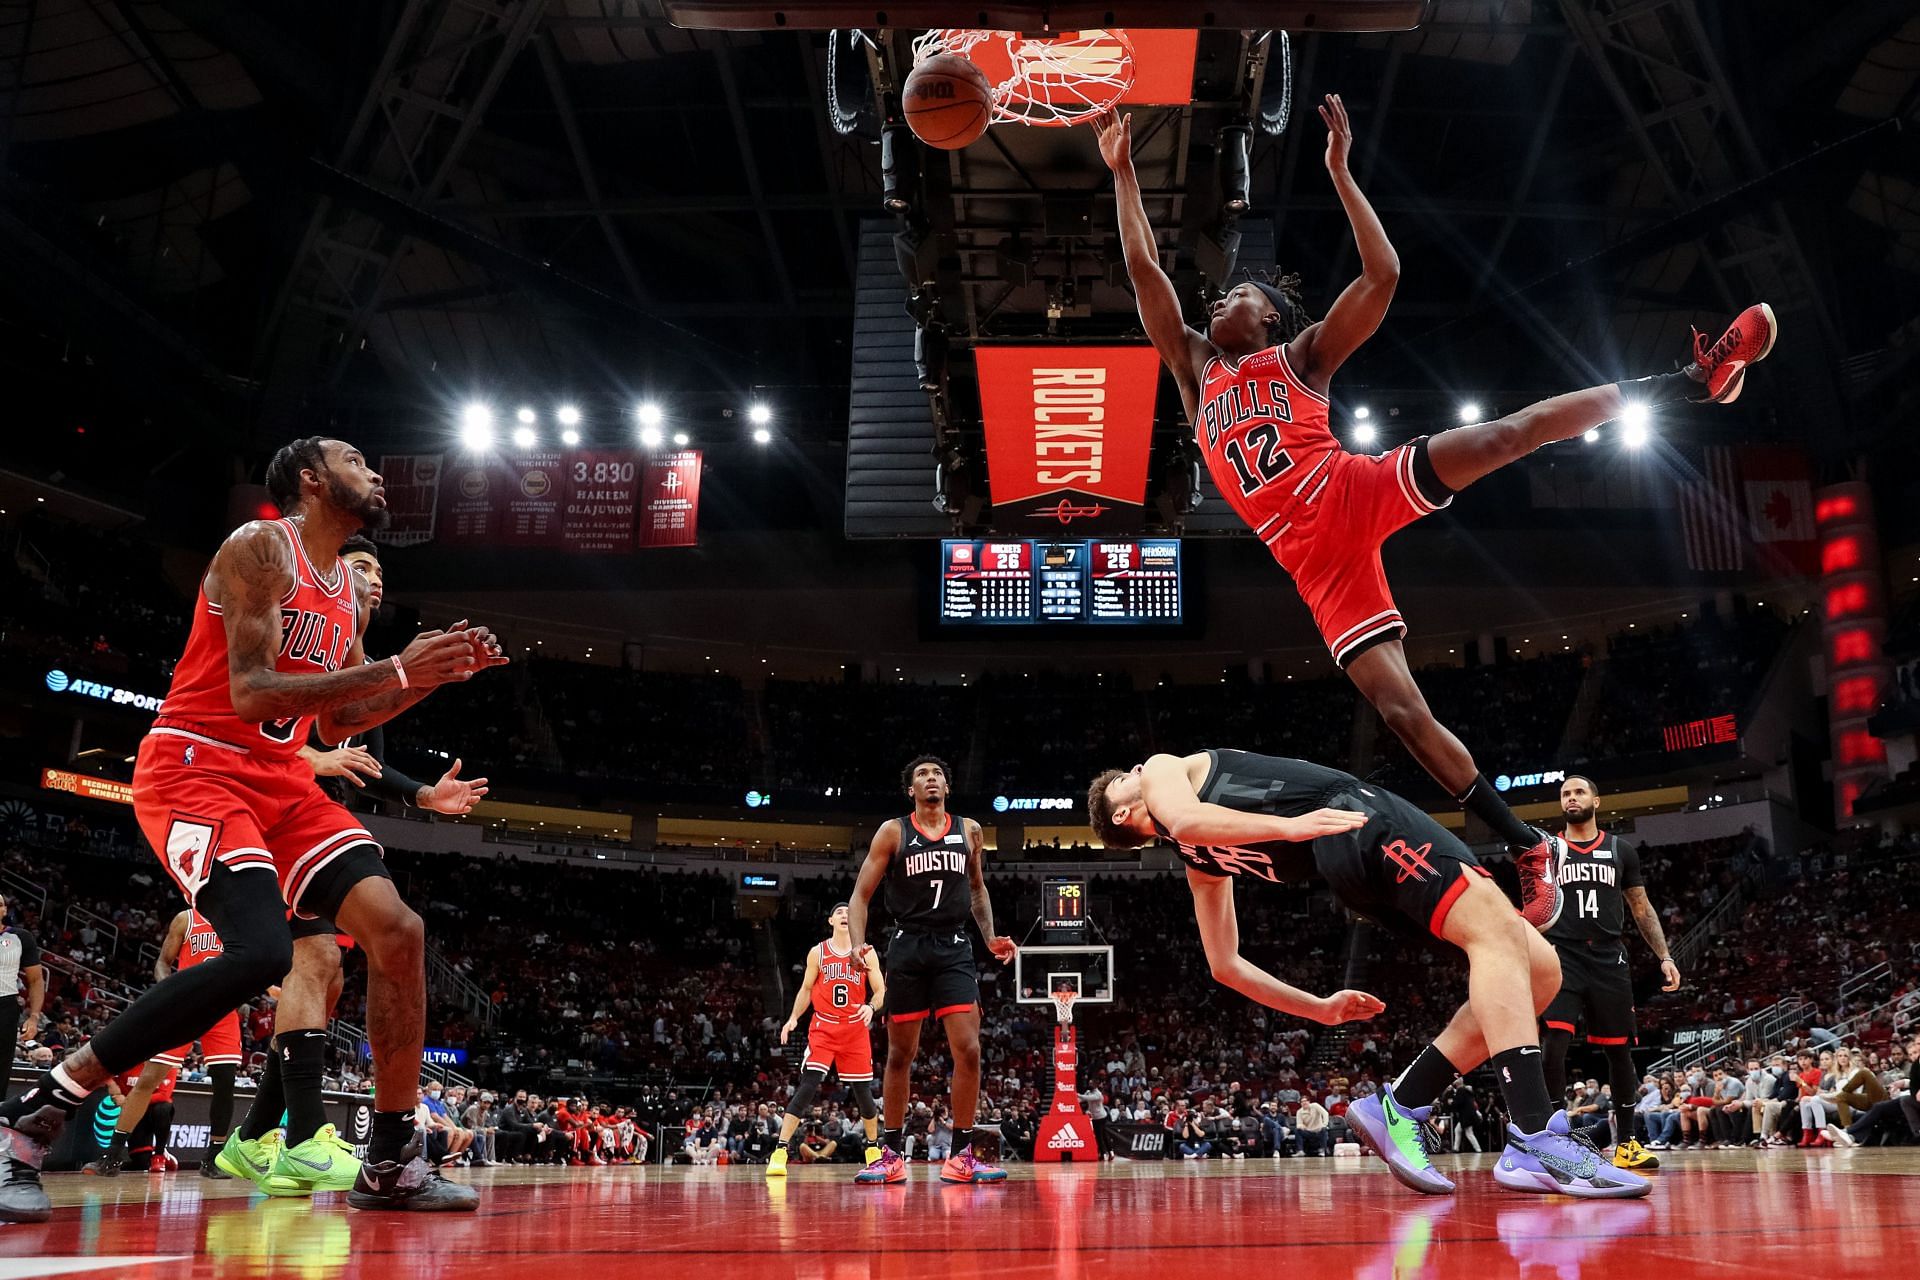 Chicago Bulls lost their game to the Houston Rockets on Wednesday